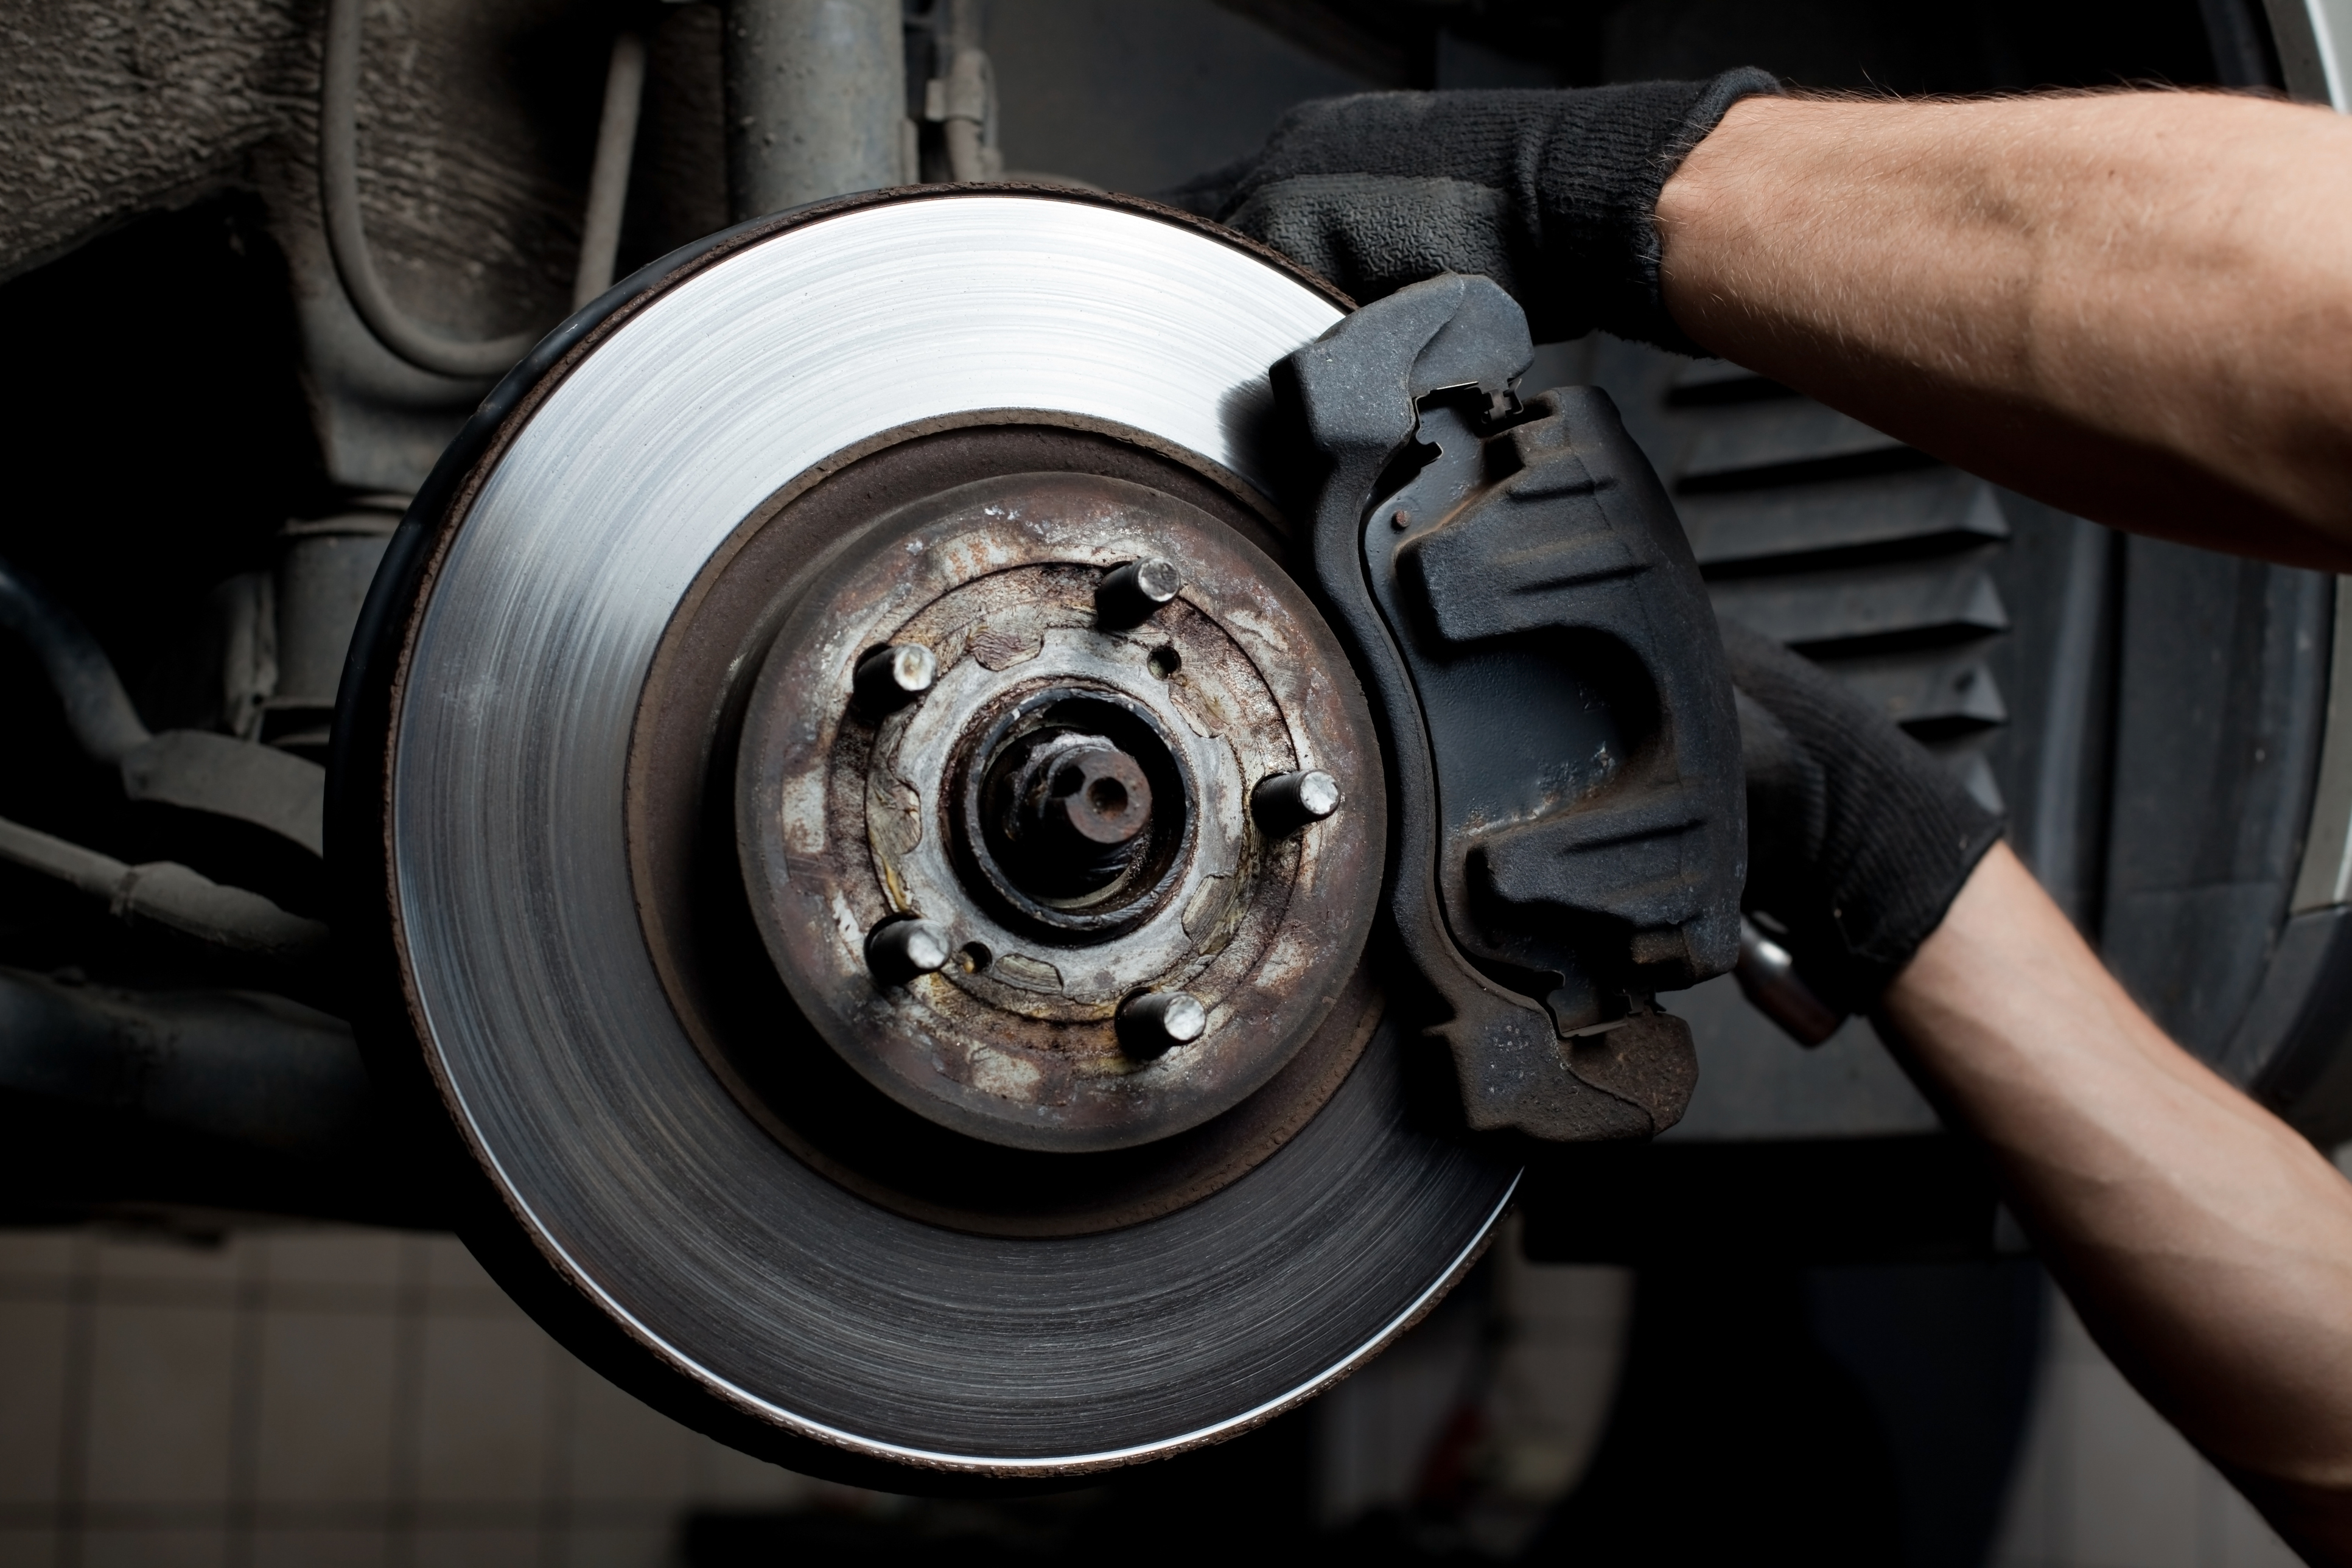 Do you need new brakes?